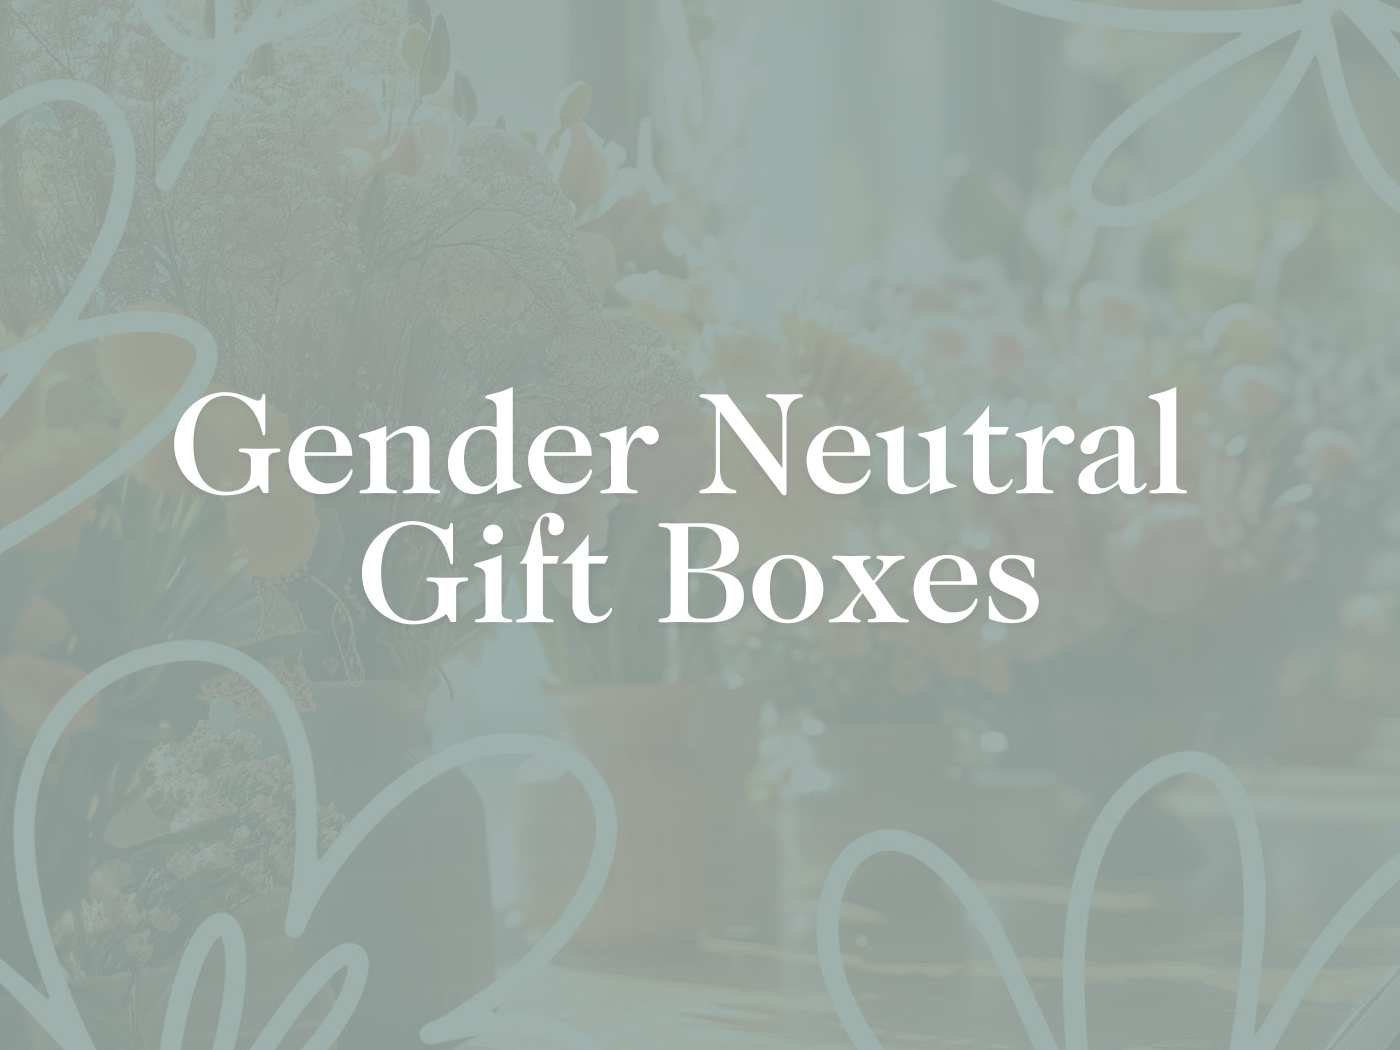 Promotional image for the Gender Neutral Gift Boxes Collection, showcasing versatile and inclusive gift options suitable for all, from Fabulous Flowers and Gifts.